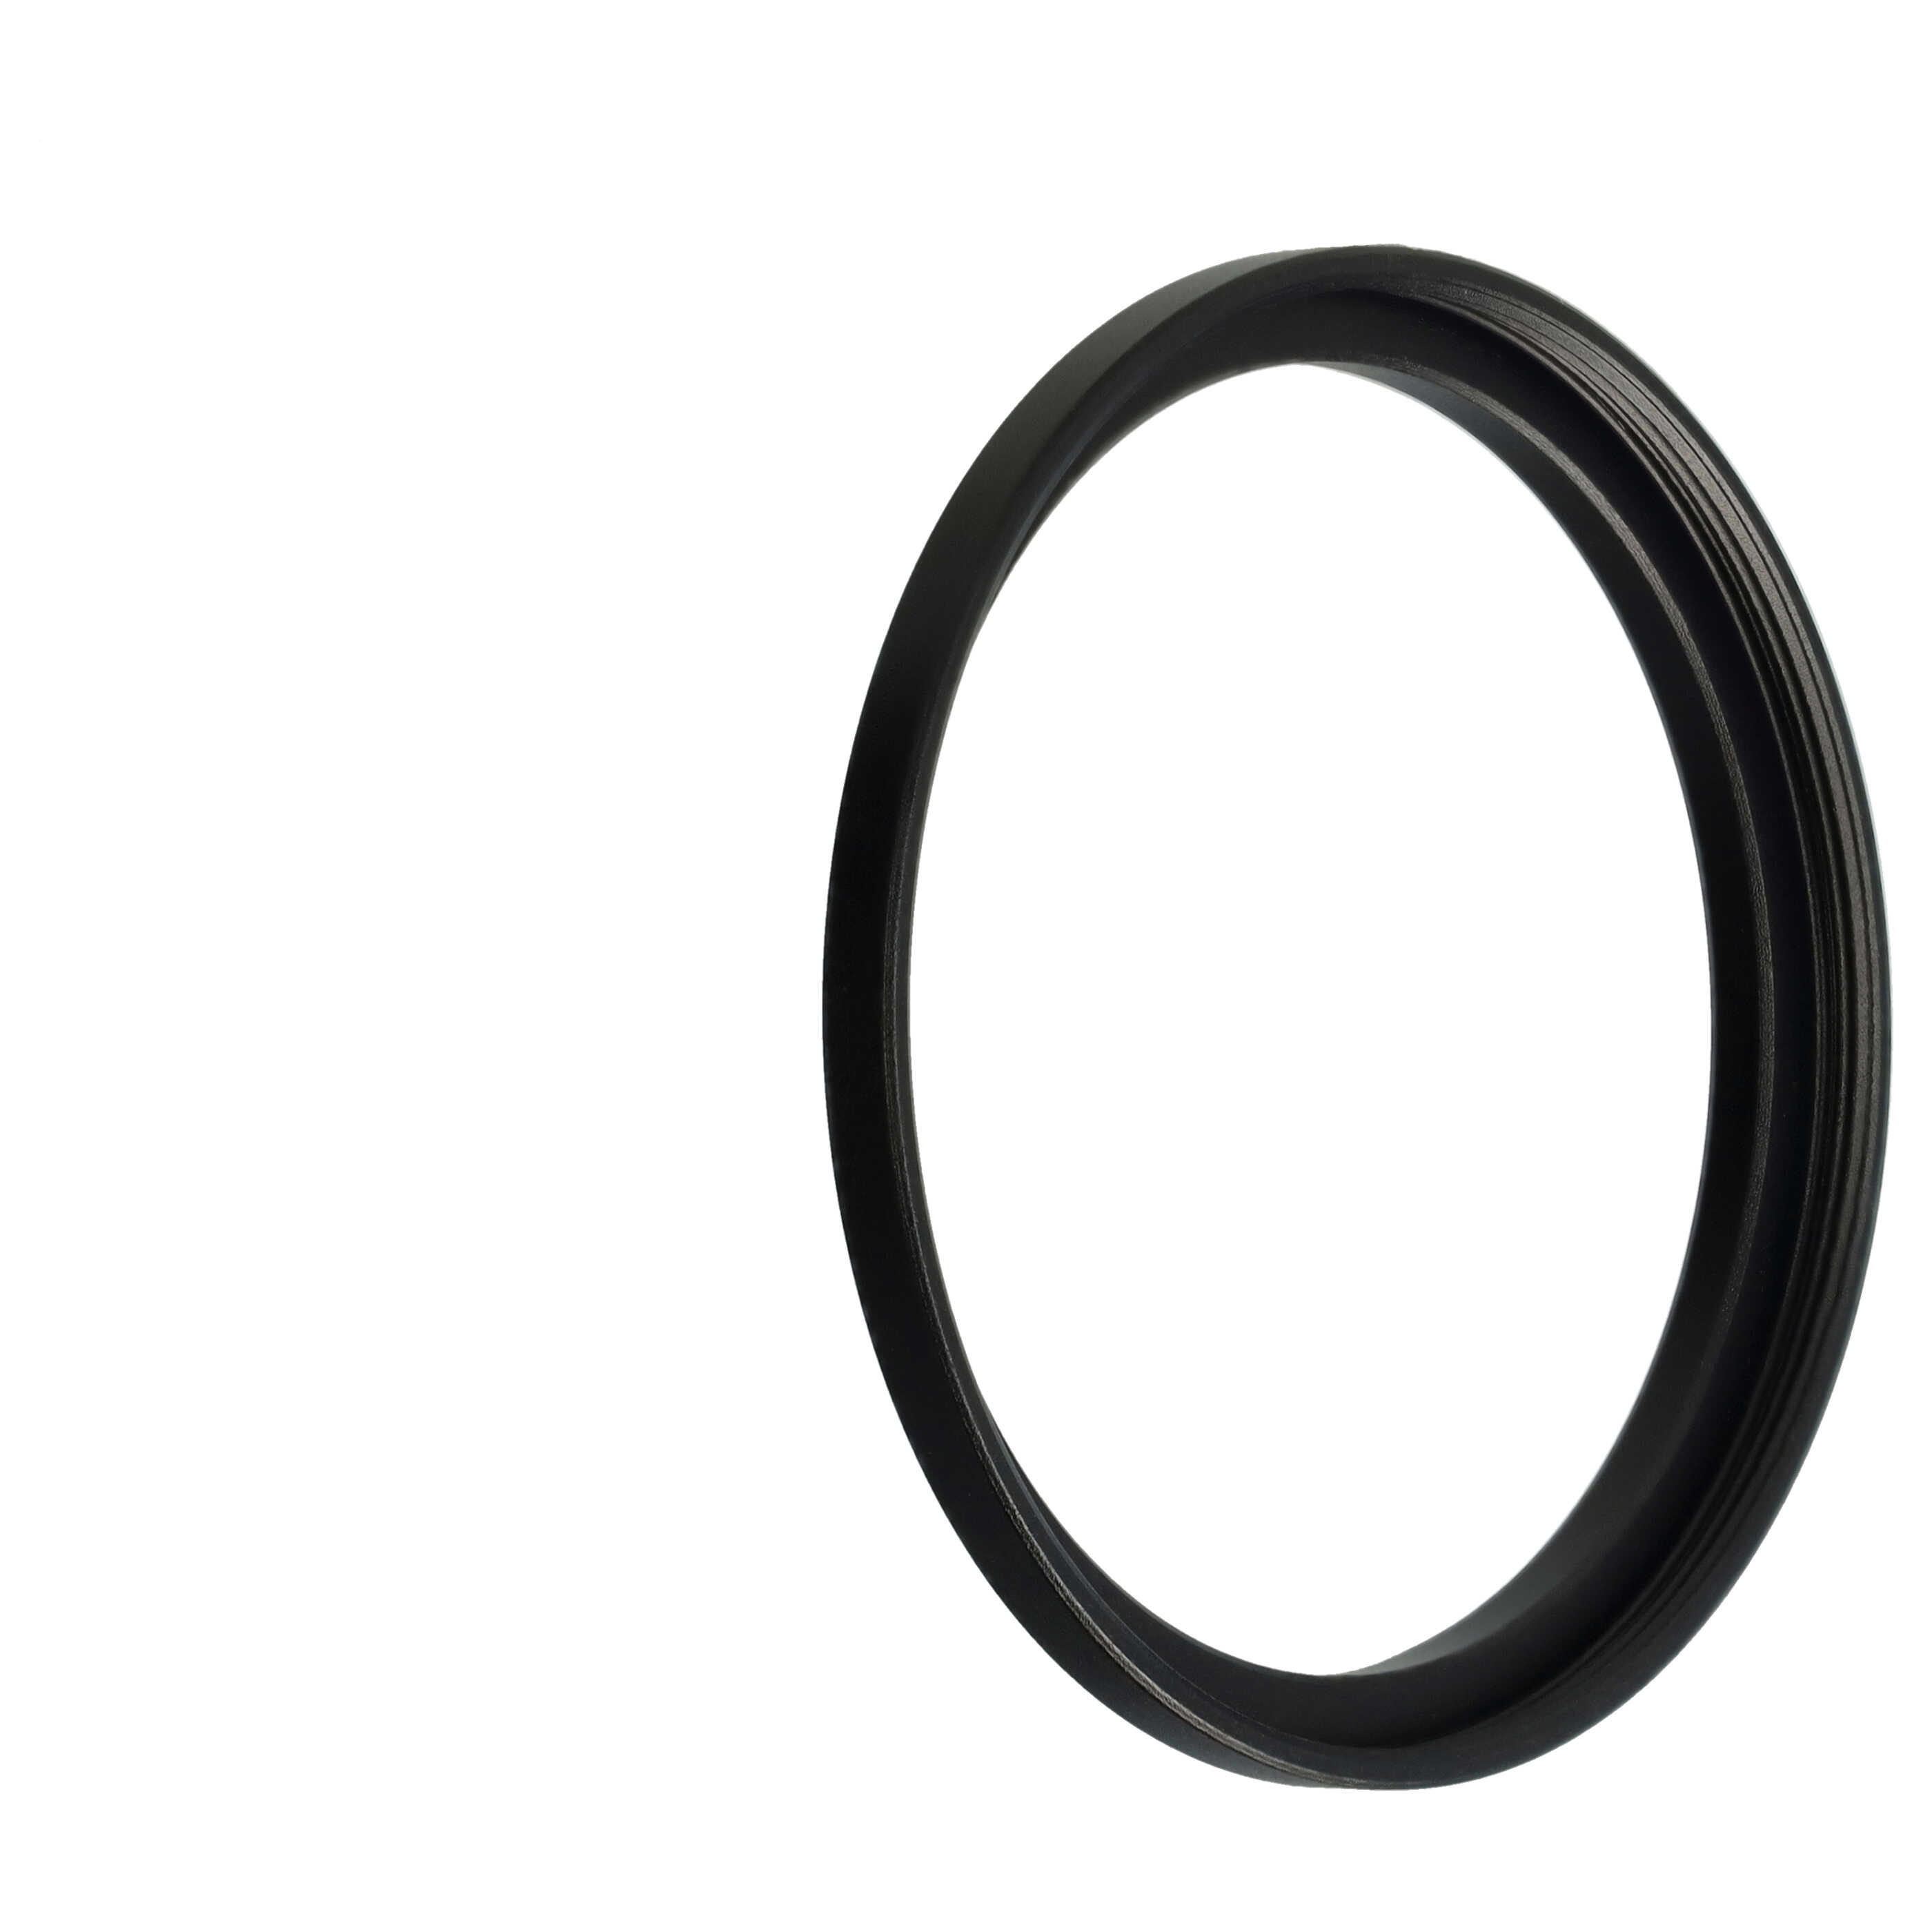 Step-Up Ring Adapter of 52 mm to 55 mmfor various Camera Lens - Filter Adapter